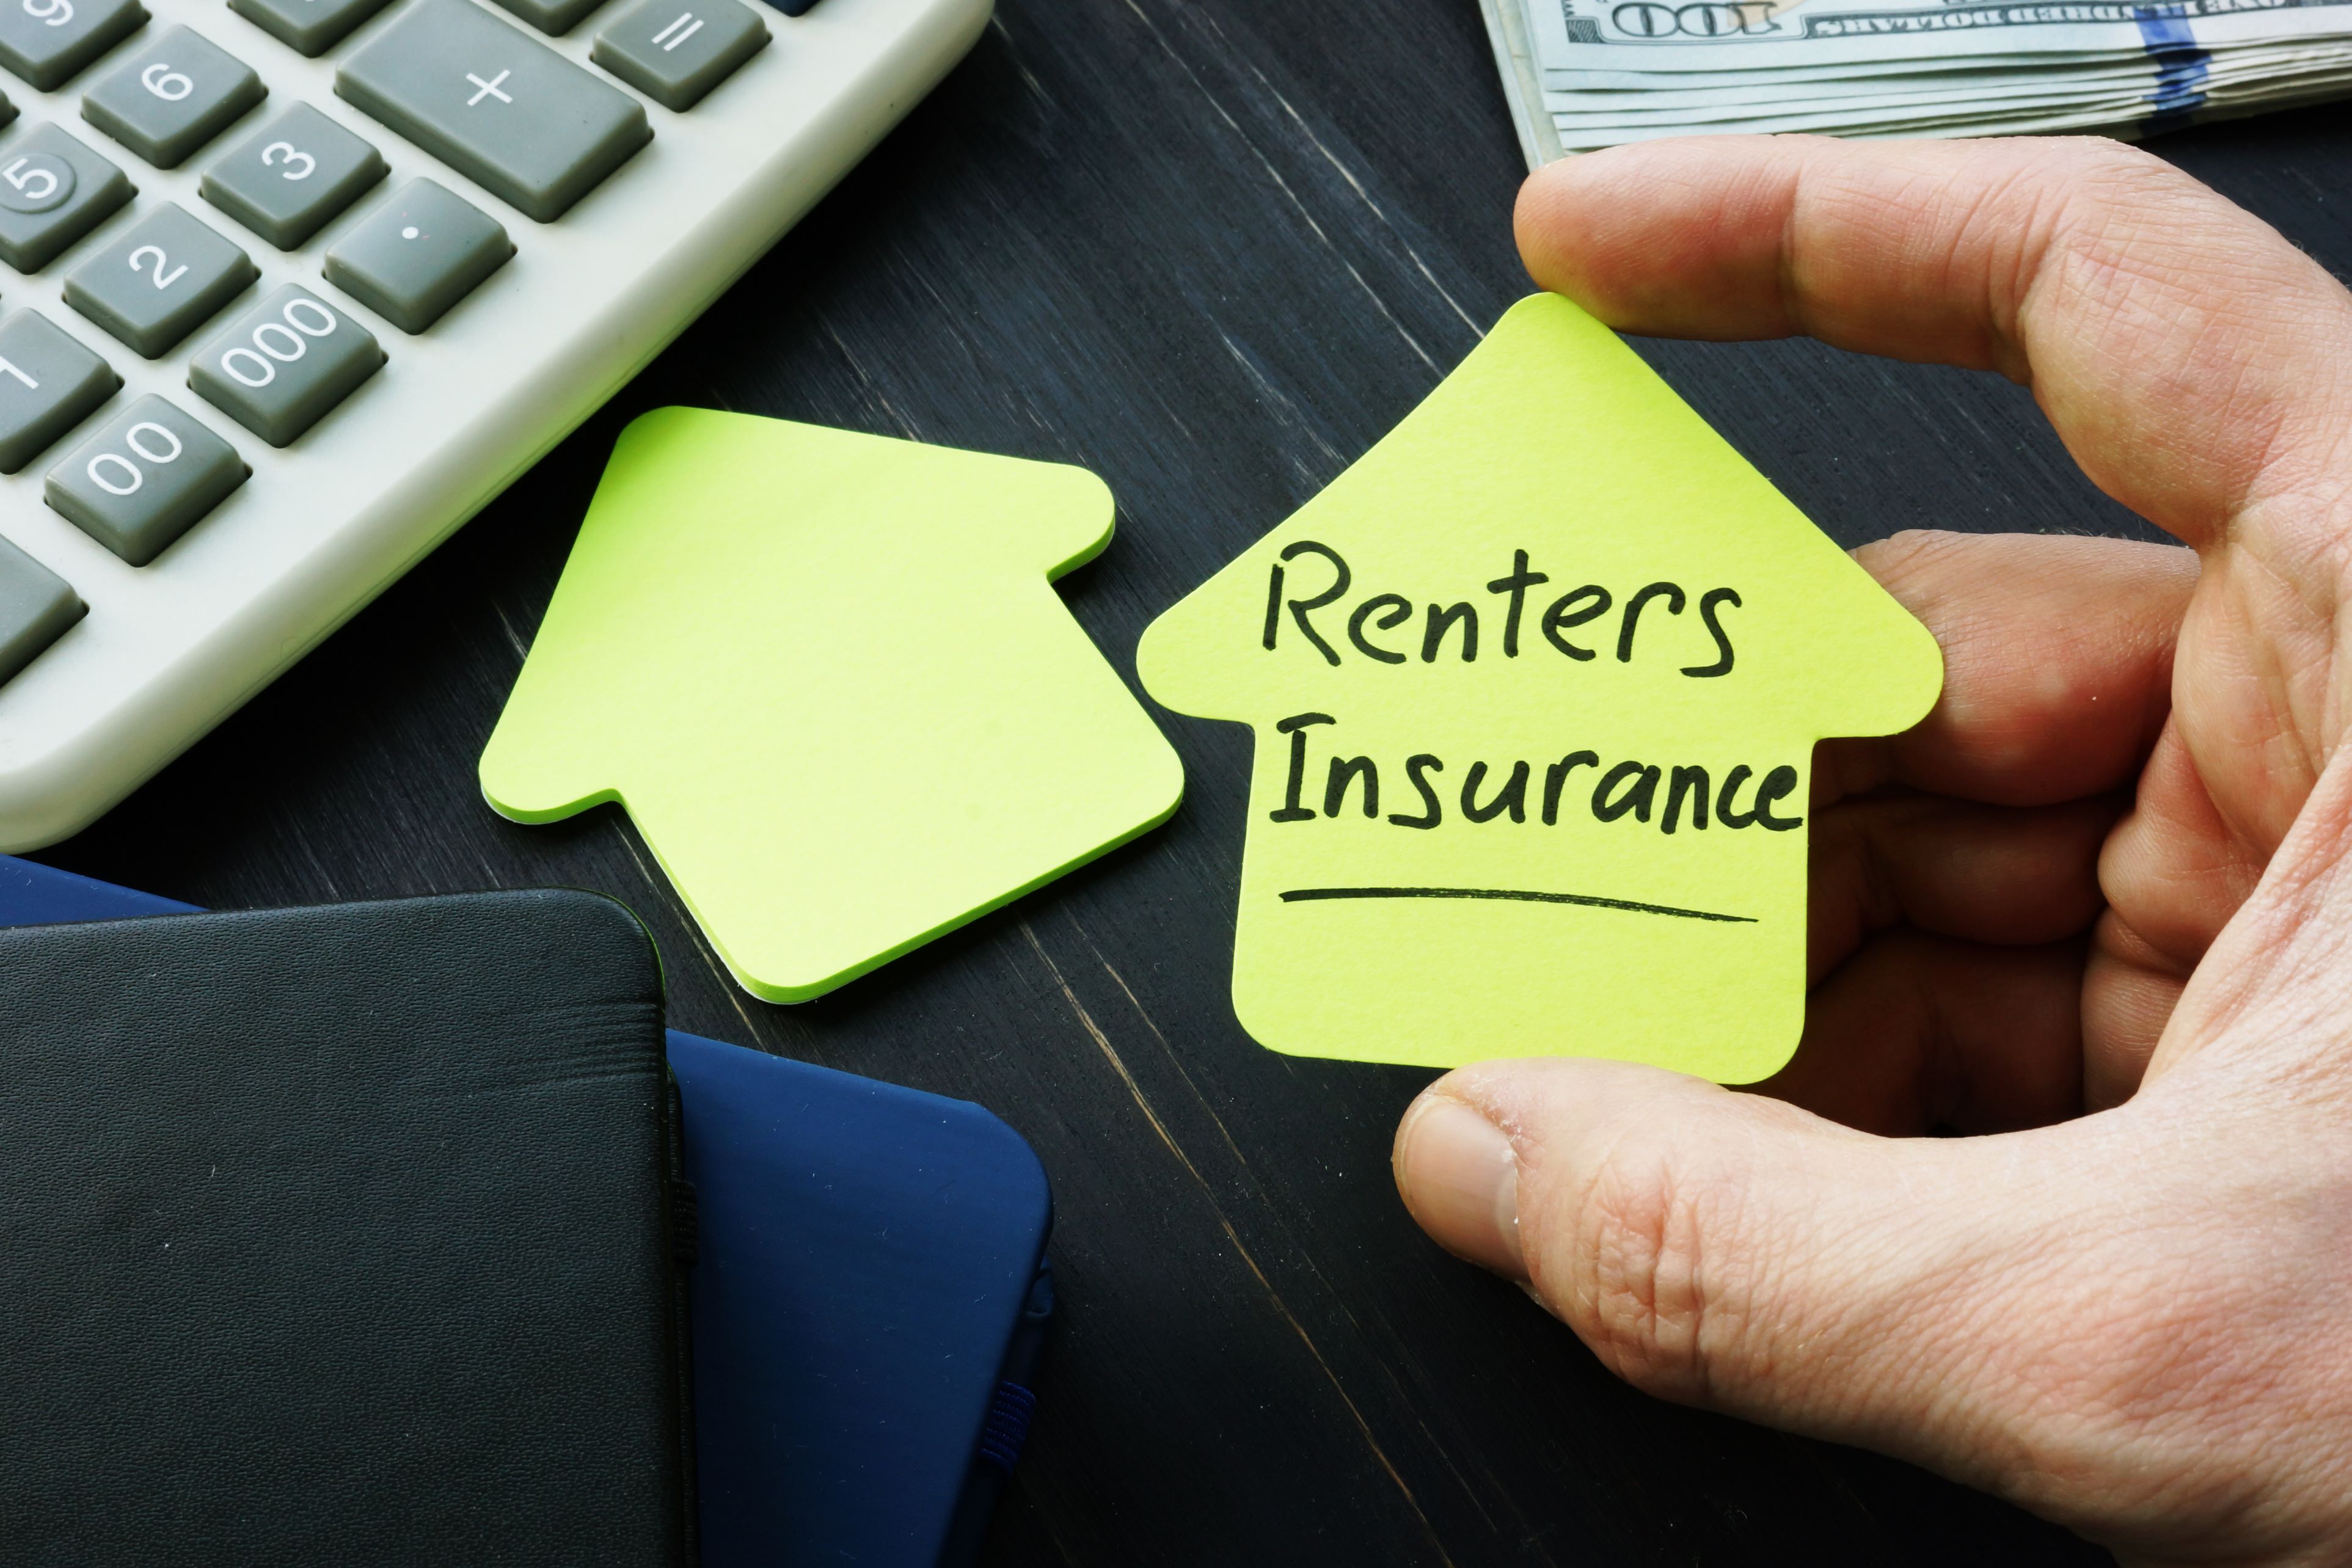 Renters Insurance on paper